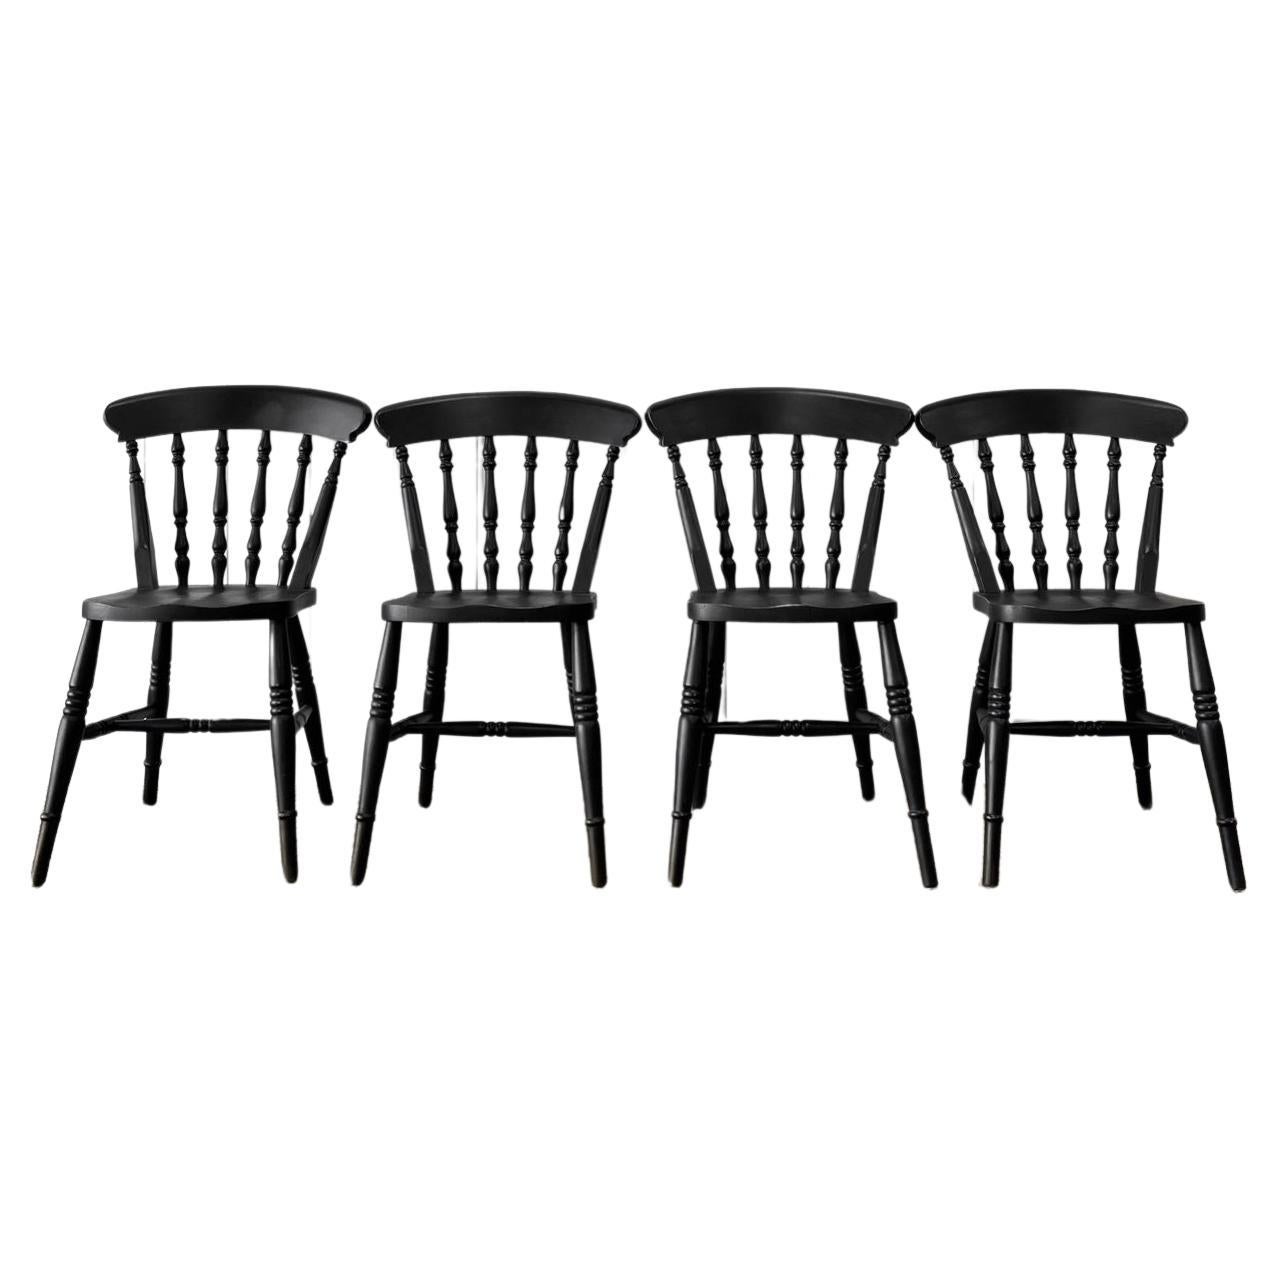 A Vintage Set of 4 Spindle Back Chairs